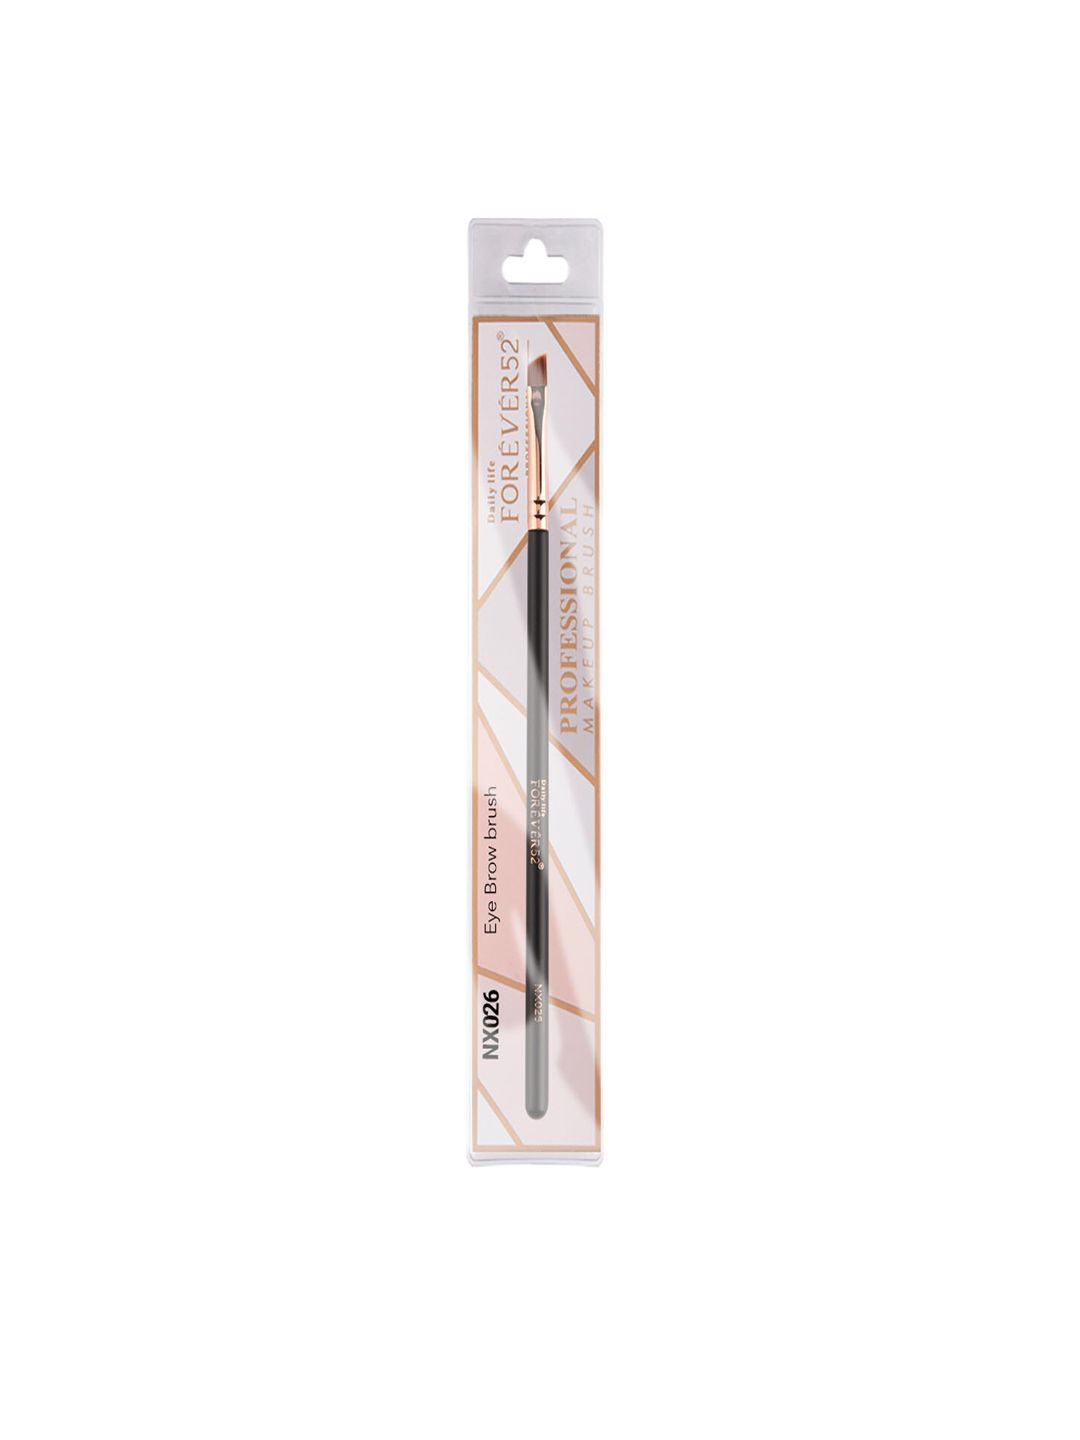 Daily Life Forever52 eye brow brush NX026 Price in India